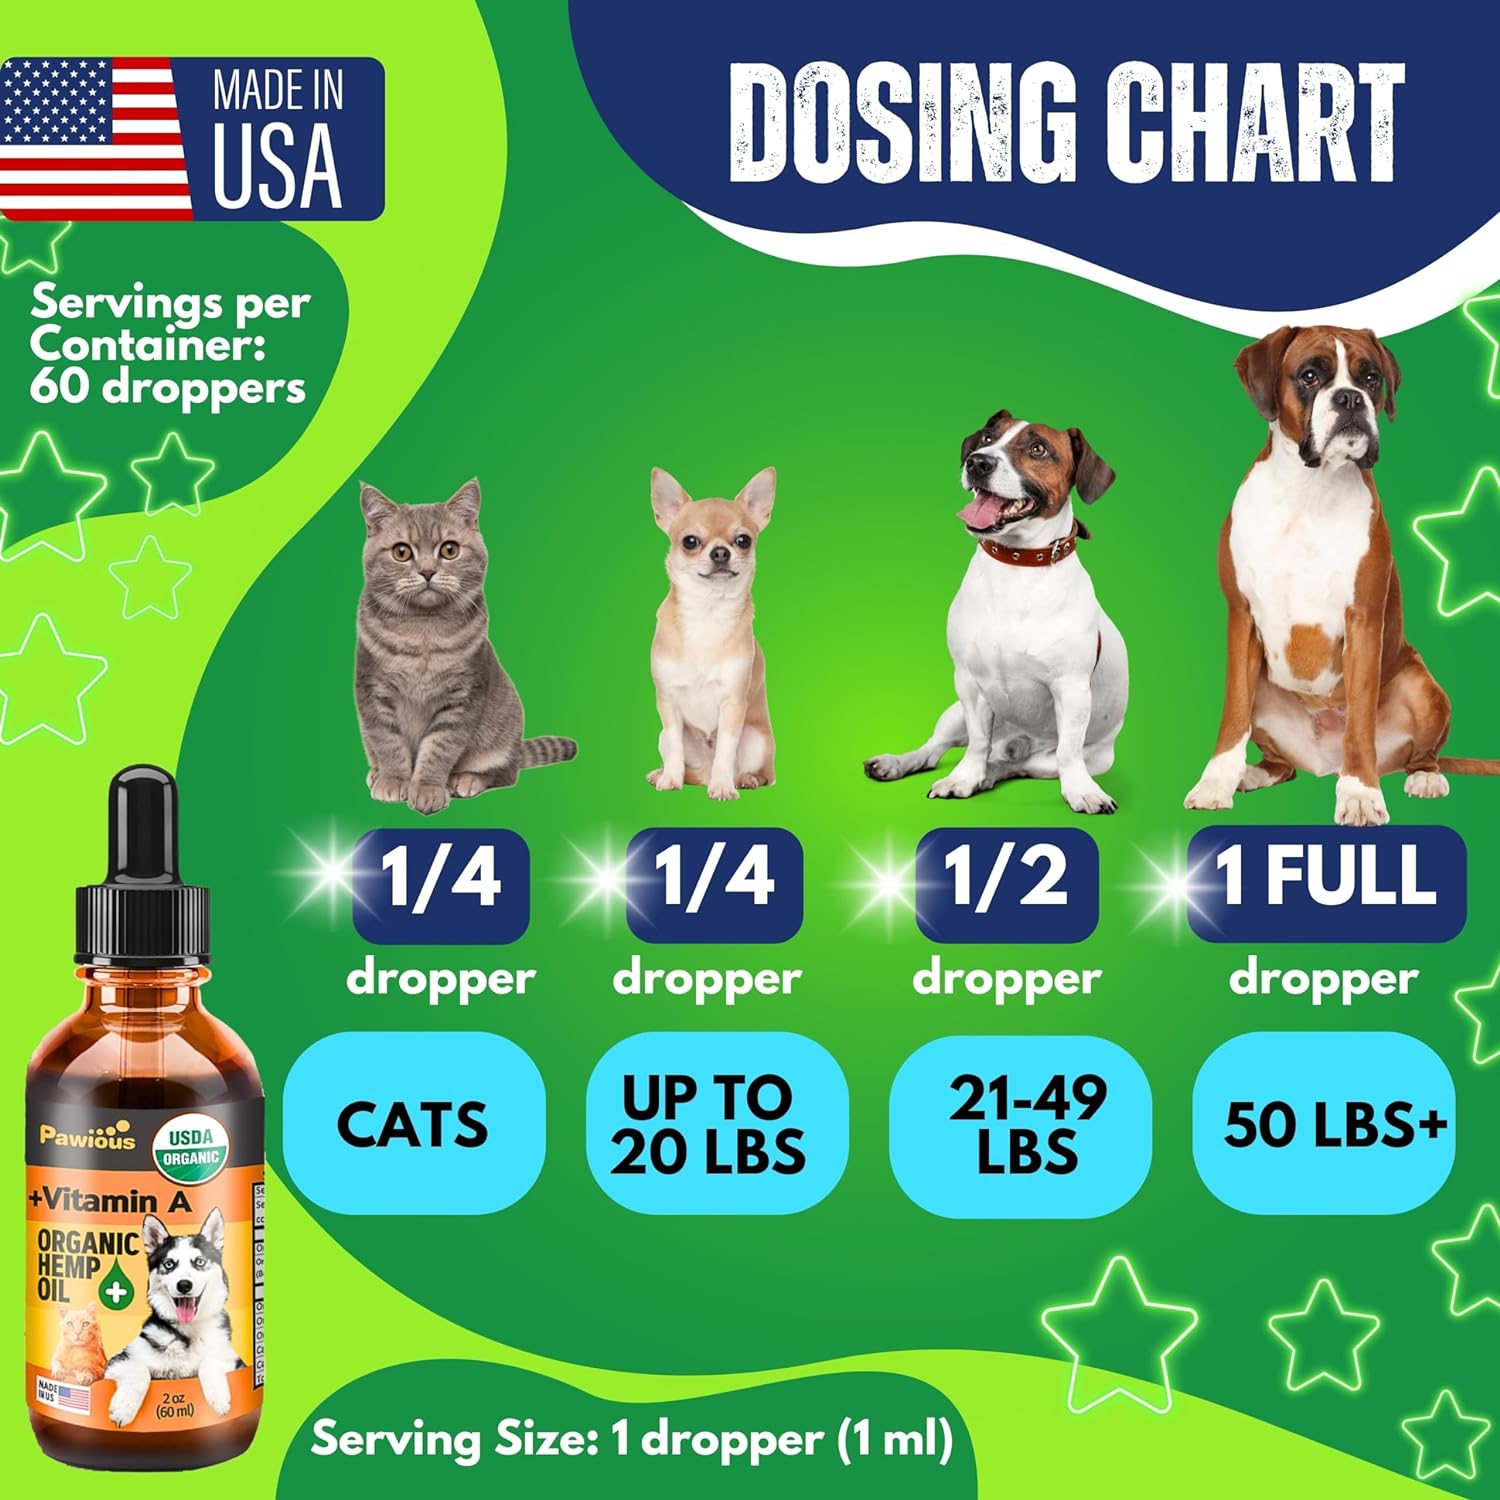 Pawious - Hemp Oil for Dogs and Cats - USDA Organic, Large 2oz Bottle, Made in USA - Omega 3, 6 and 9, Vitamins A and E - Hip and Joint Support - Anxiety, Arthritis and Seizures Relief, Calming Aid : Pet Supplies